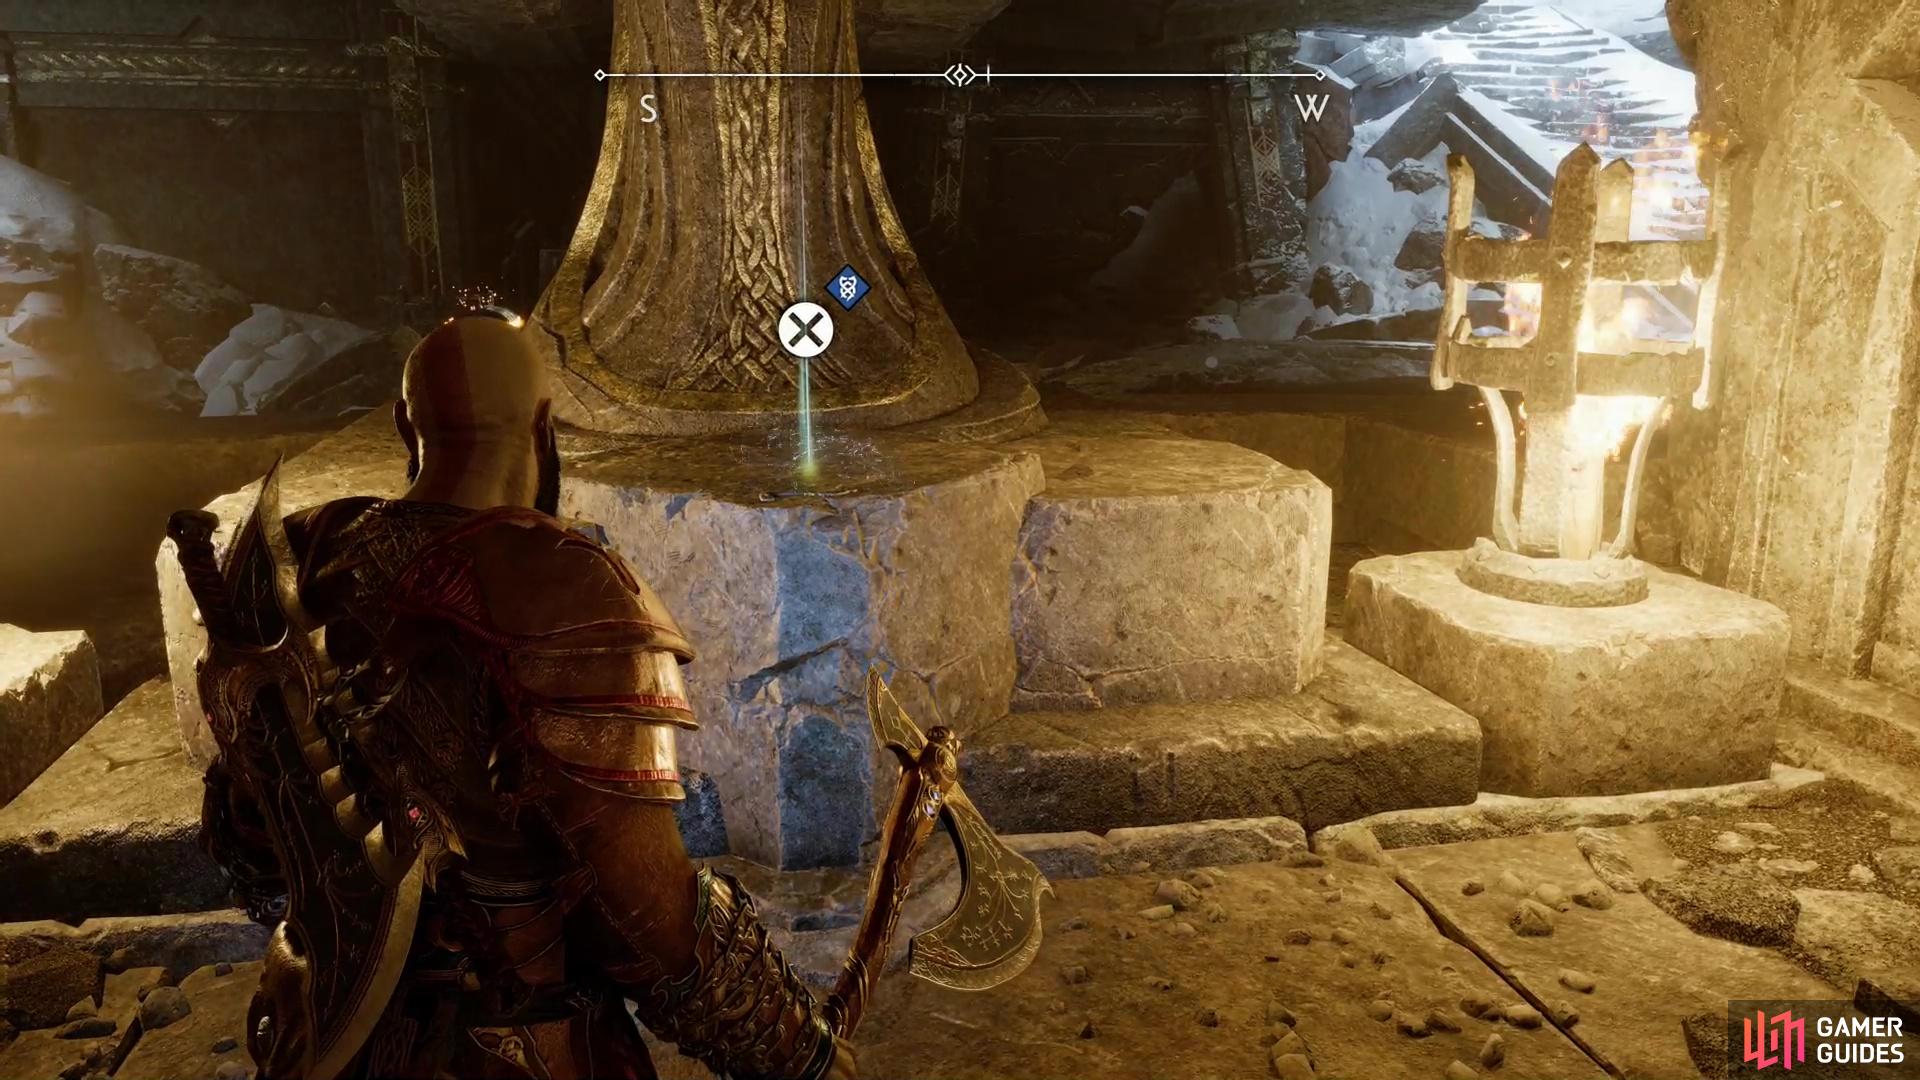 If Time Travel allowed our current Kratos, with his Leviathan Axe